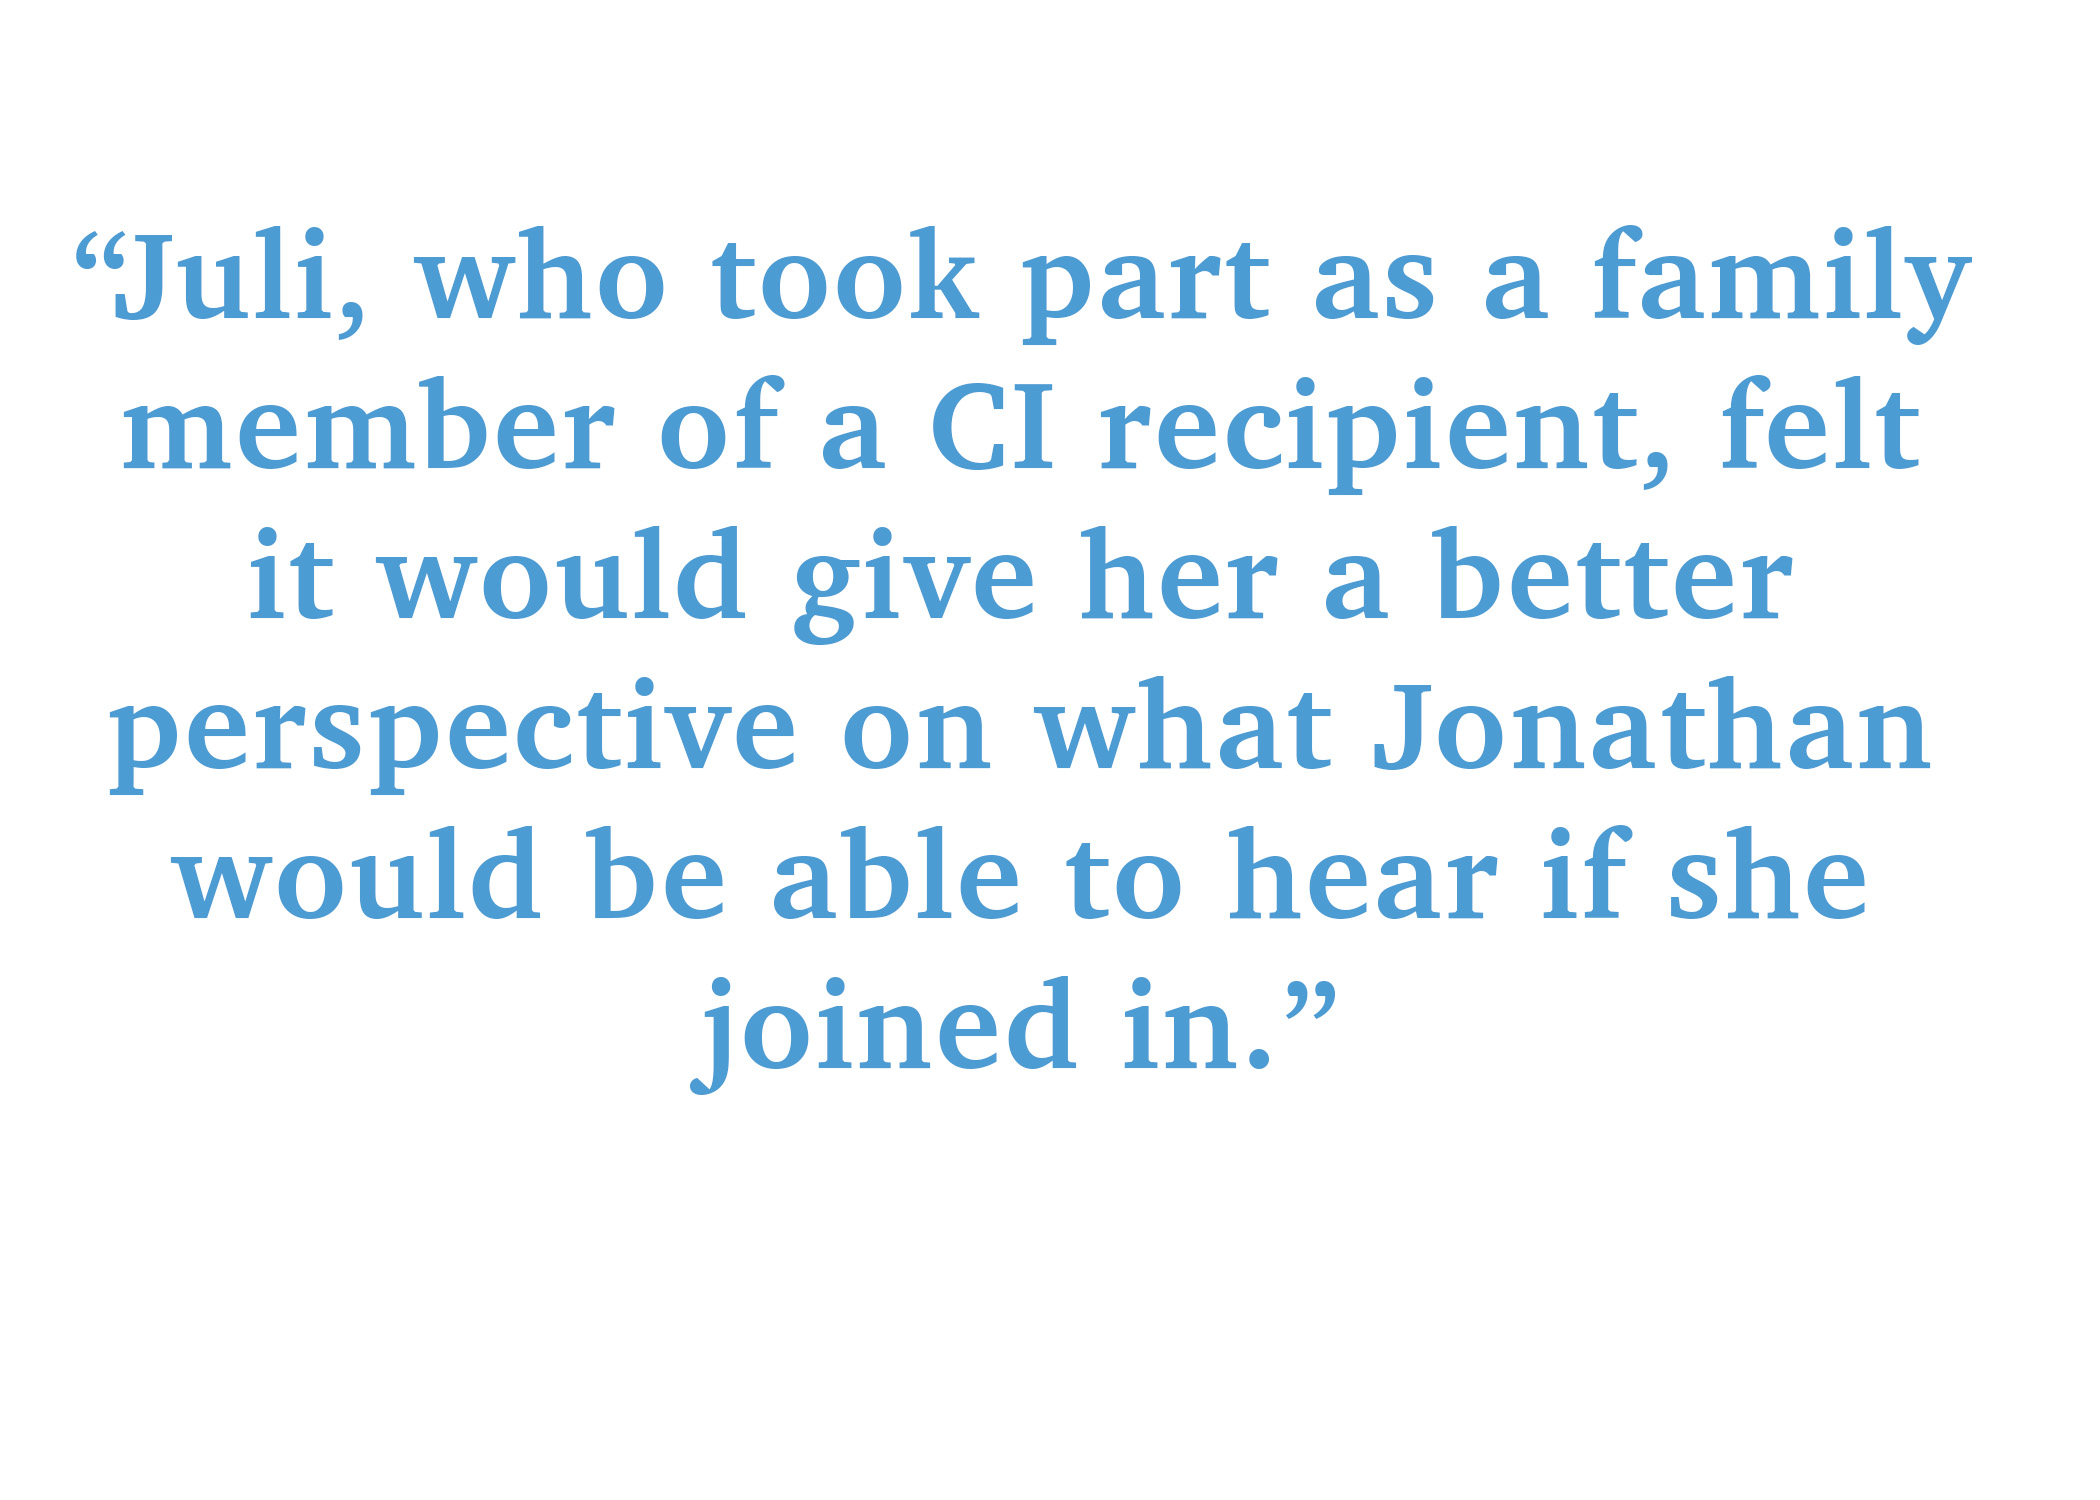 Juli, who took part as a family member of a CI recipient, felt it would give her a better perspective on what Jonathan would be able to hear if she joined in